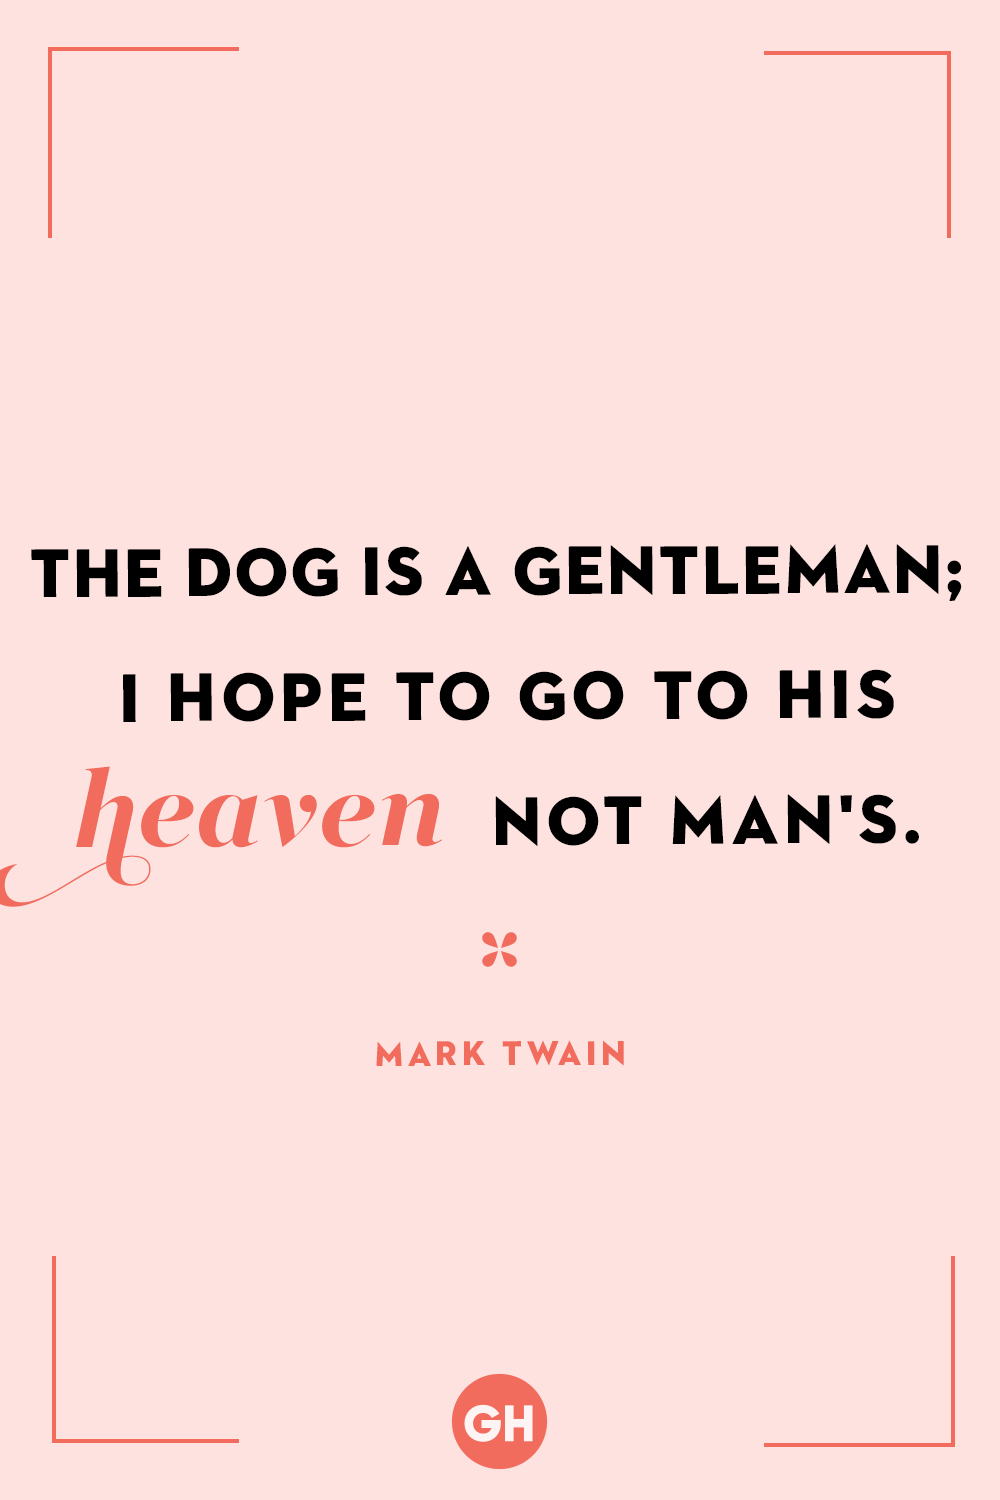 what did mark twain say about dogs